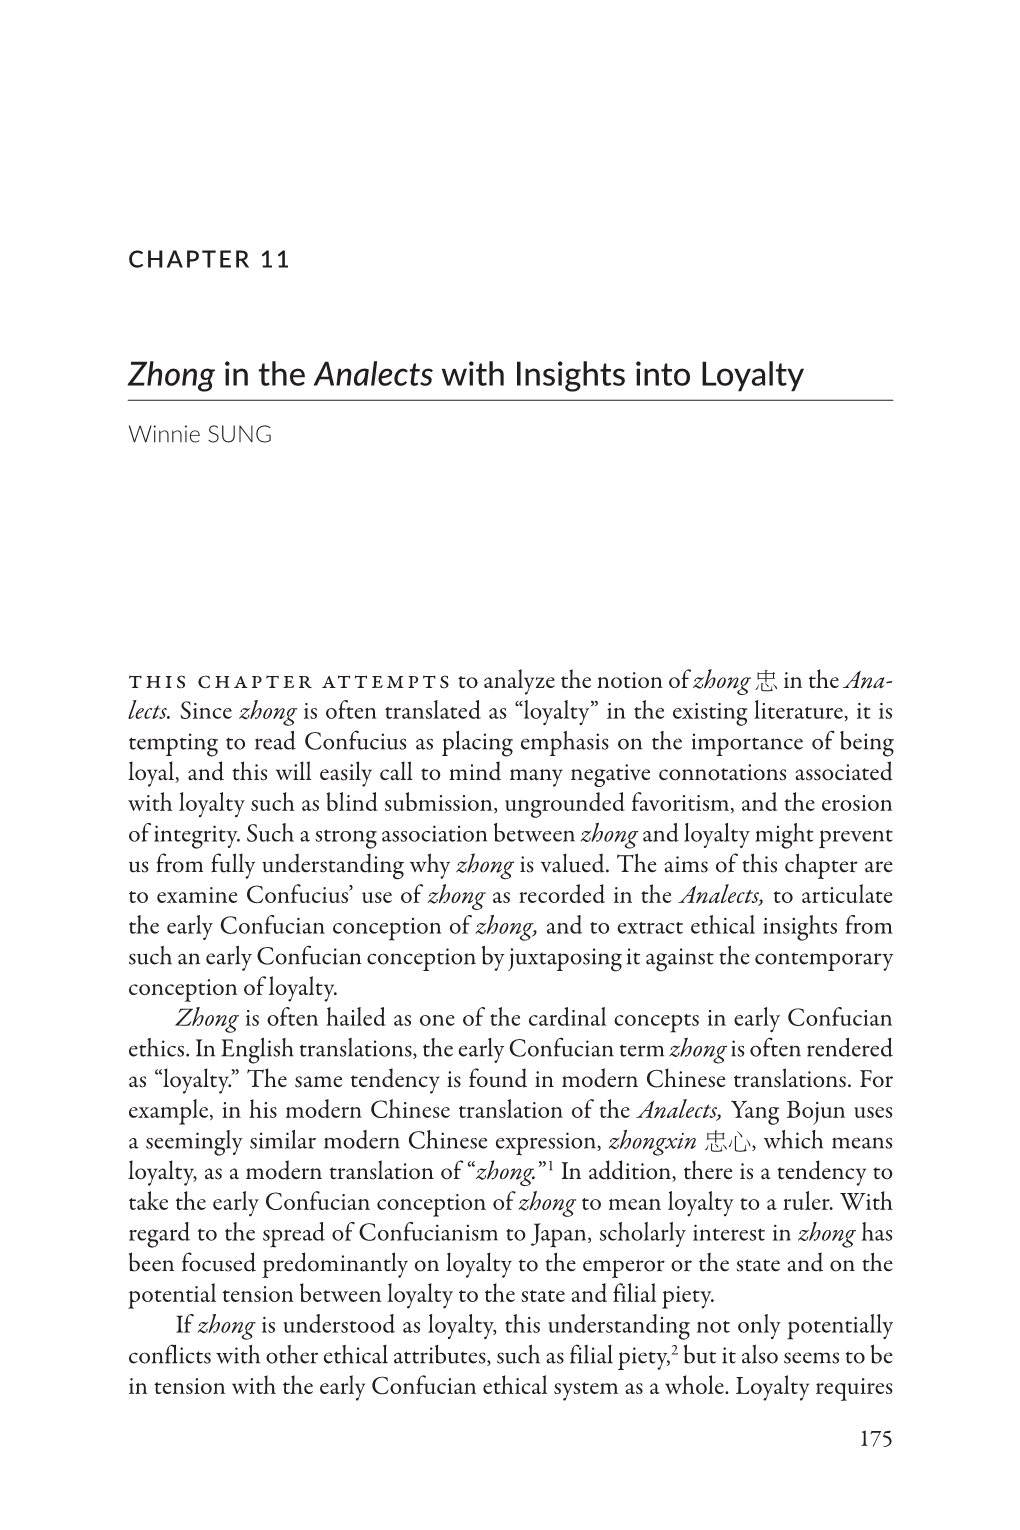 Zhong in the Analects with Insights Into Loyalty